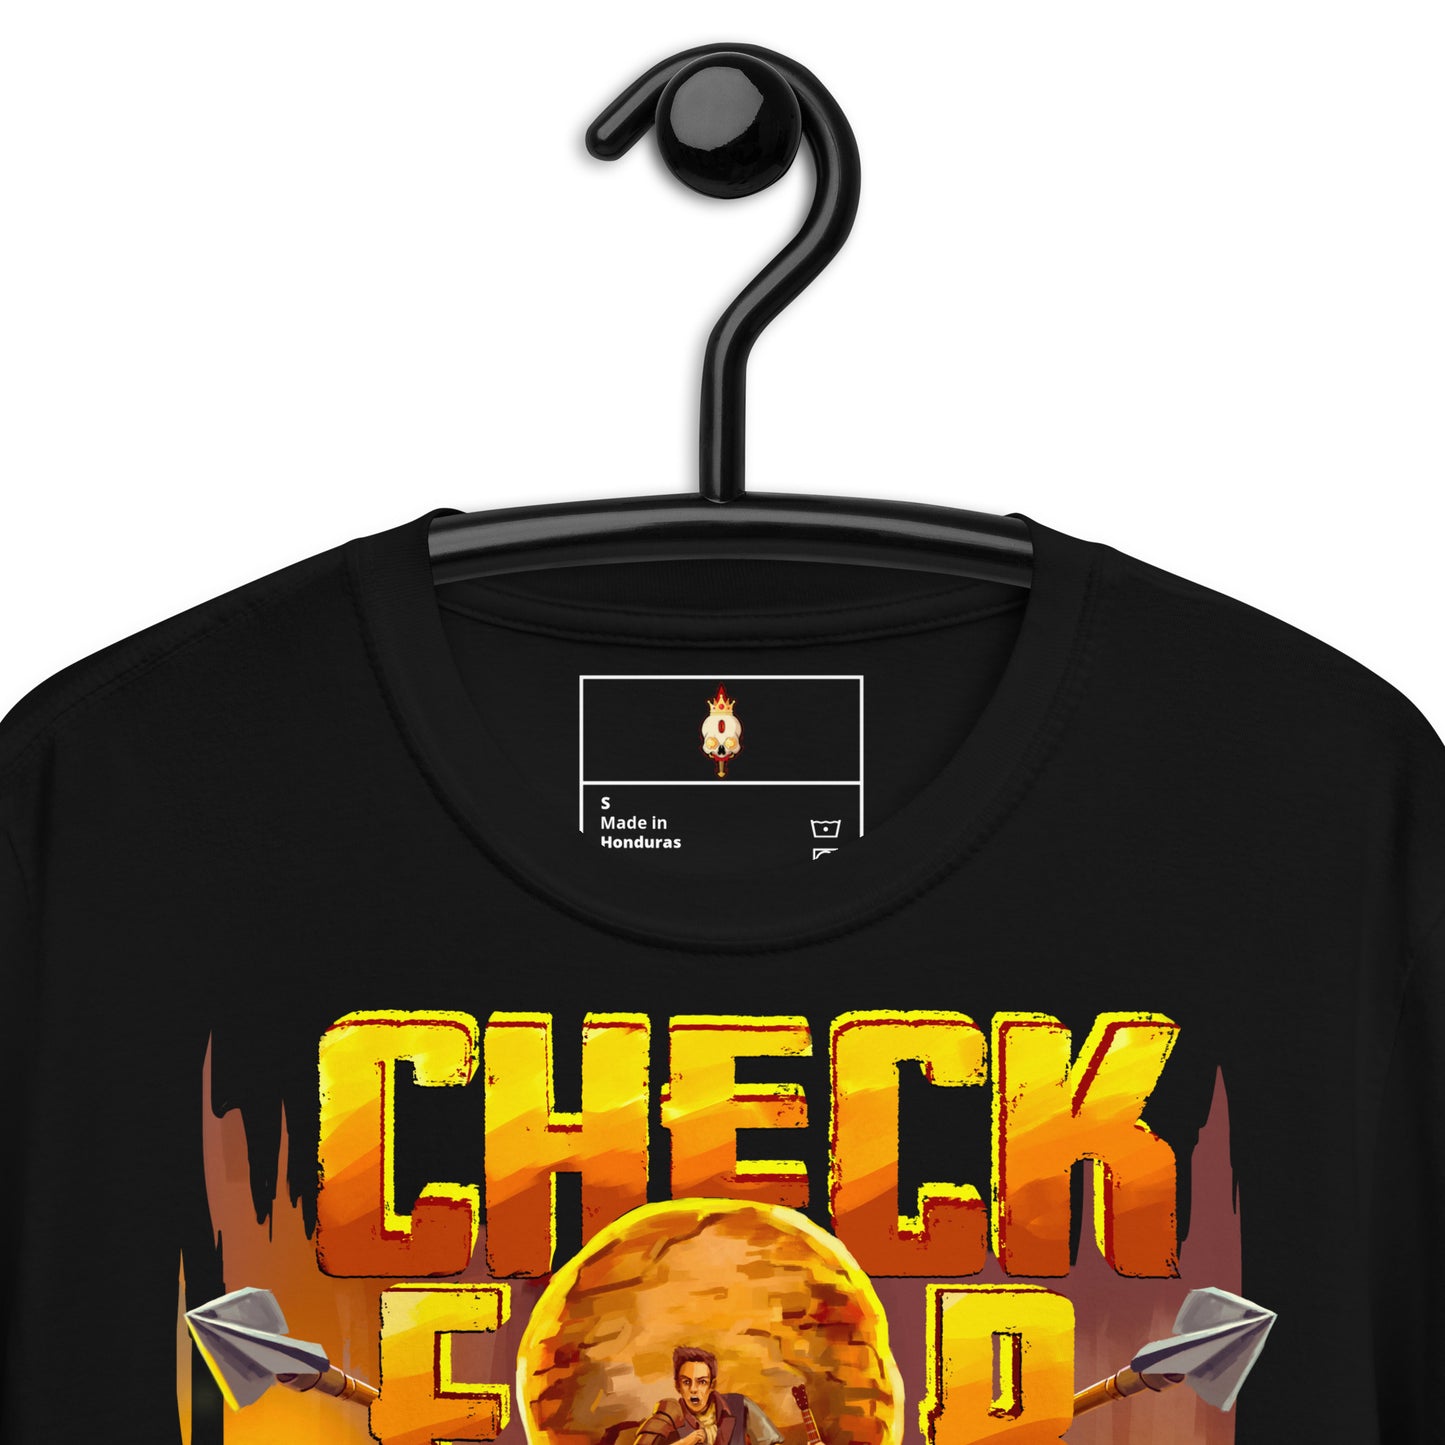 Check For Traps - Short-Sleeve Unisex T-Shirt